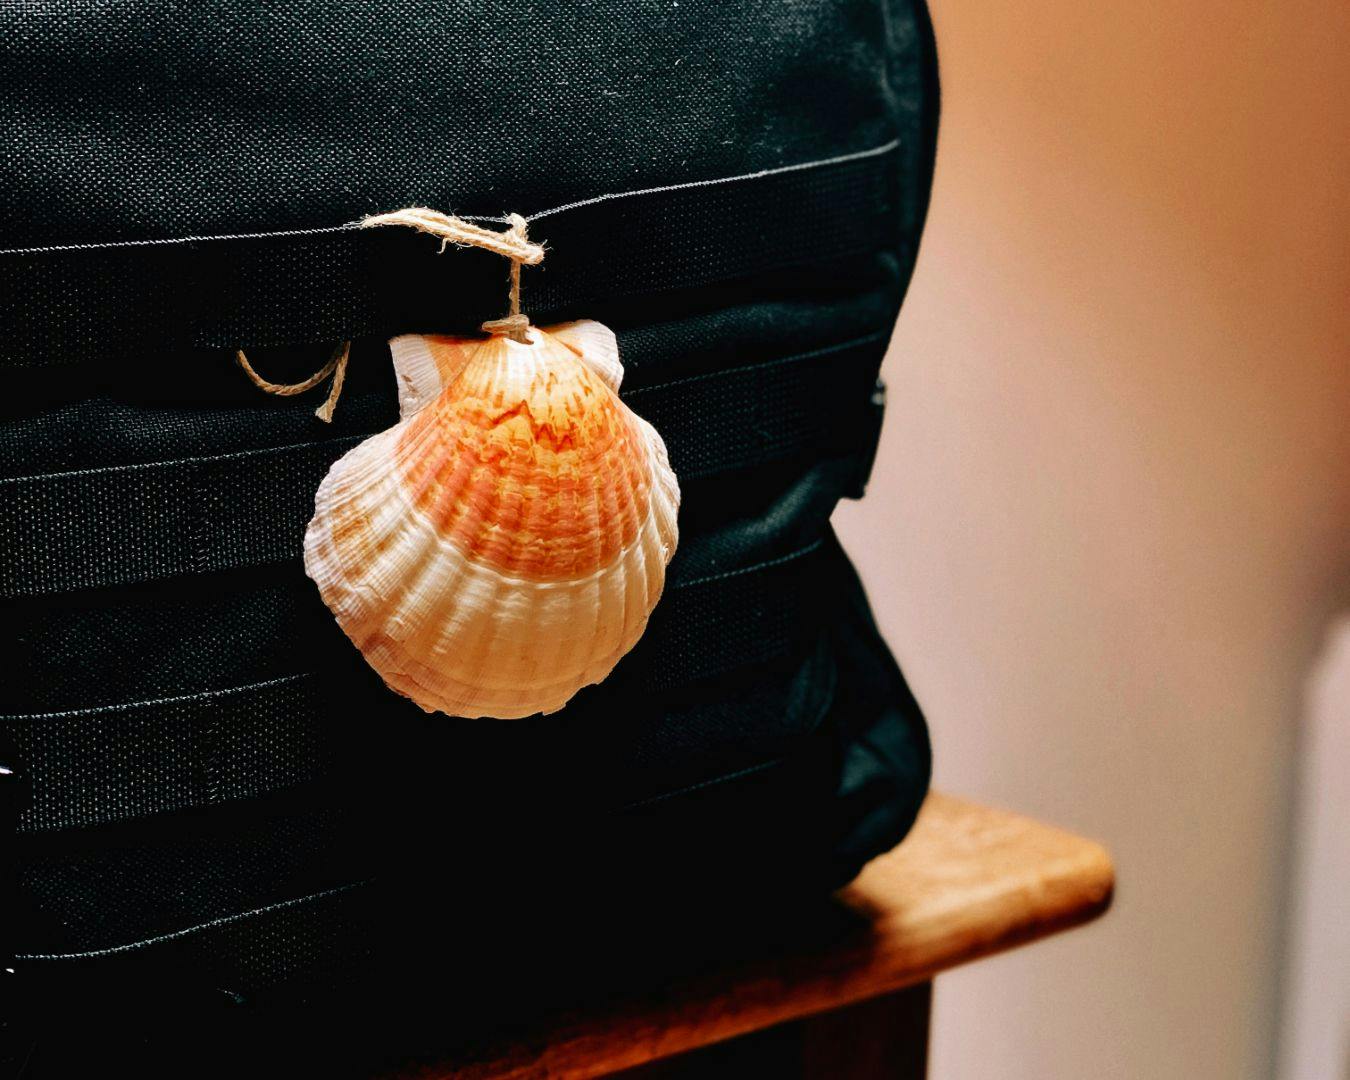 Black backpack with a Camino shell attached to it.